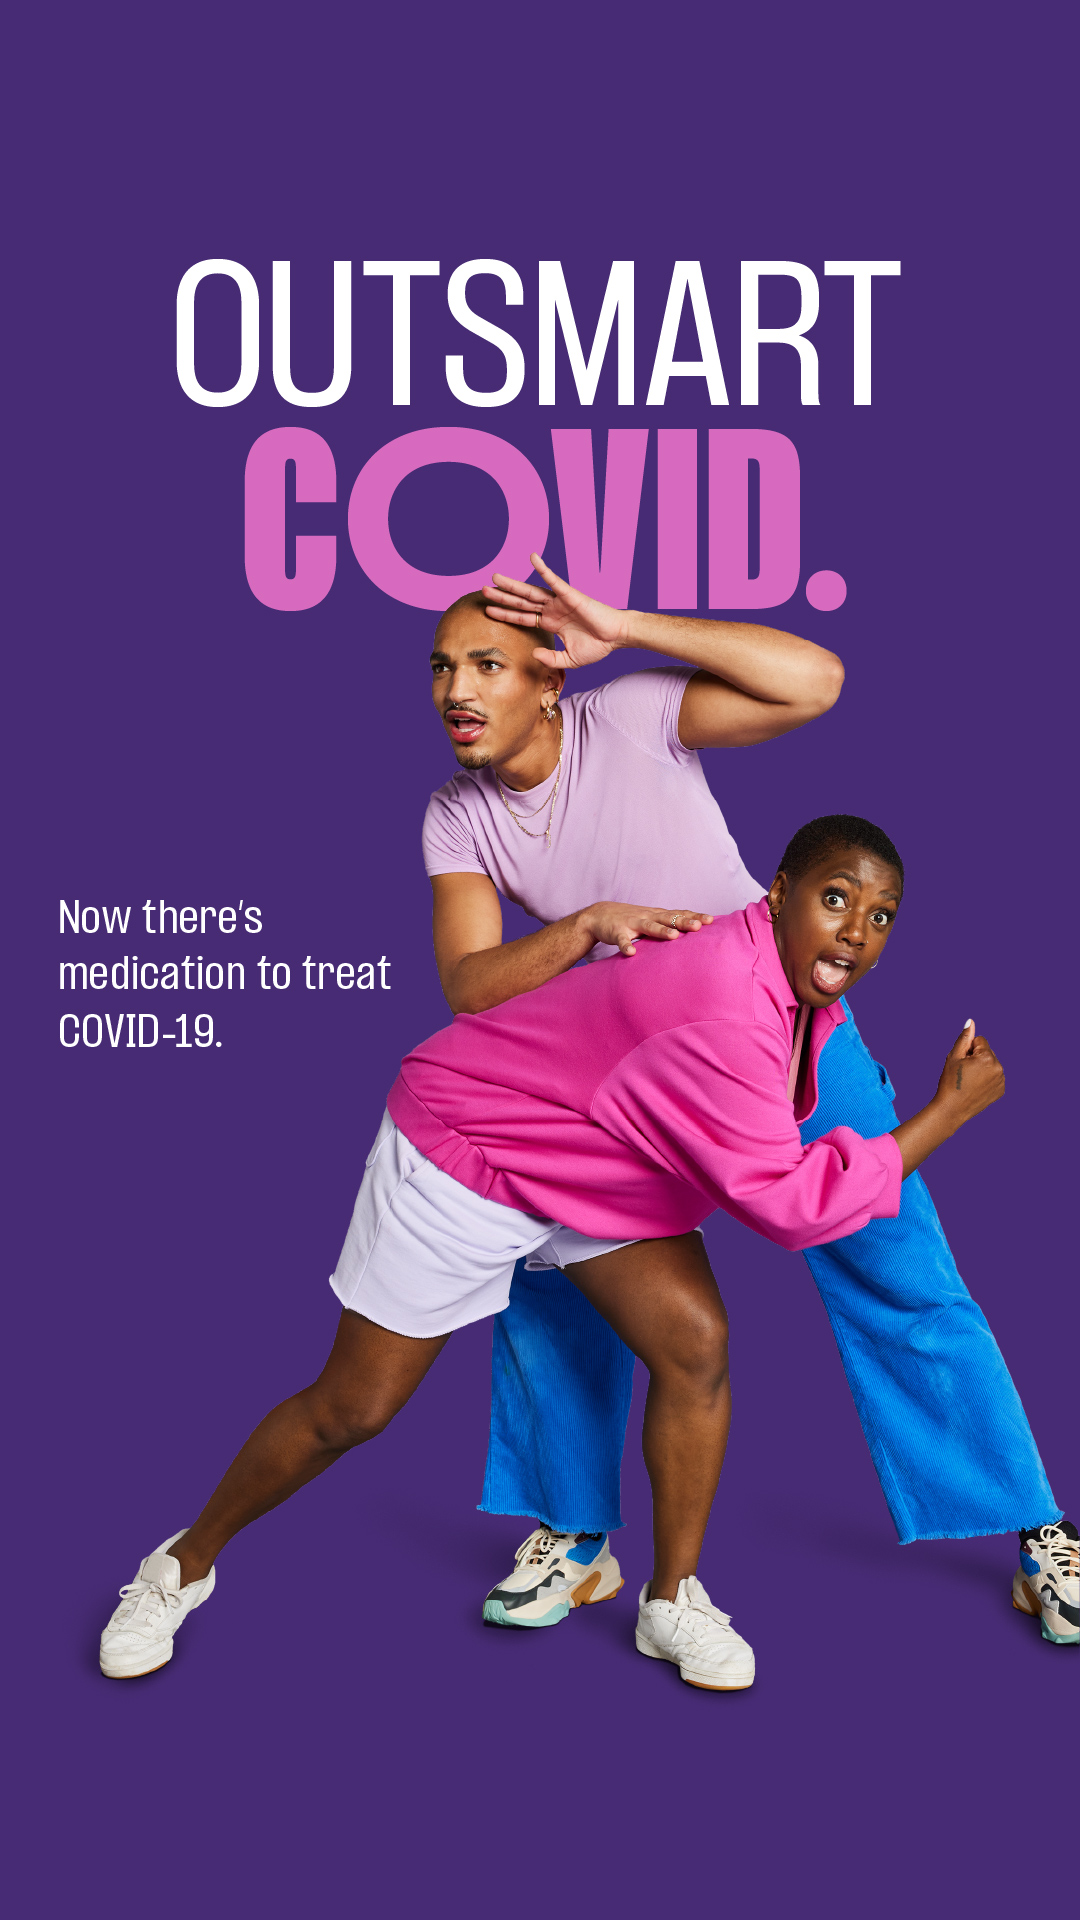 Ad with dark purple background showing a woman standing bent in a strength dance pose and man standing over her in a search dance pose. He wears a lavender t-shirt and flared blue pants, she wears a bright pink jumper and white shorts. Copy in white and yellow reads, “Outsmart COVID.” With smaller white type on left, middle, reading, “Now there’s medication to treat COVID-19.”